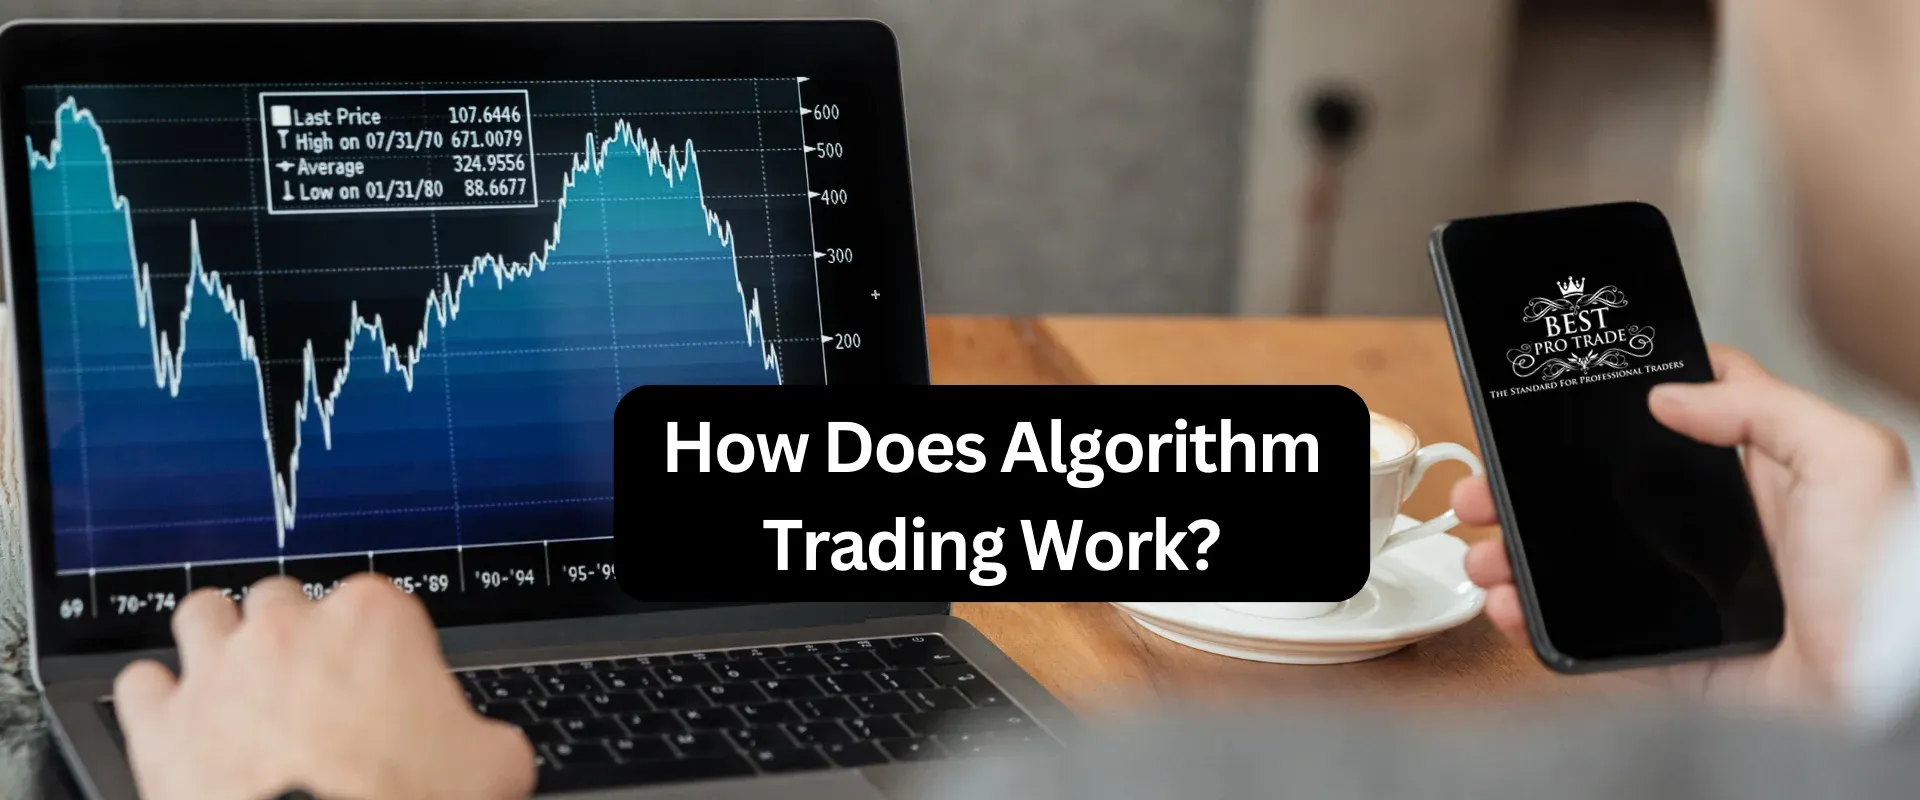 How Does Algorithm Trading Work